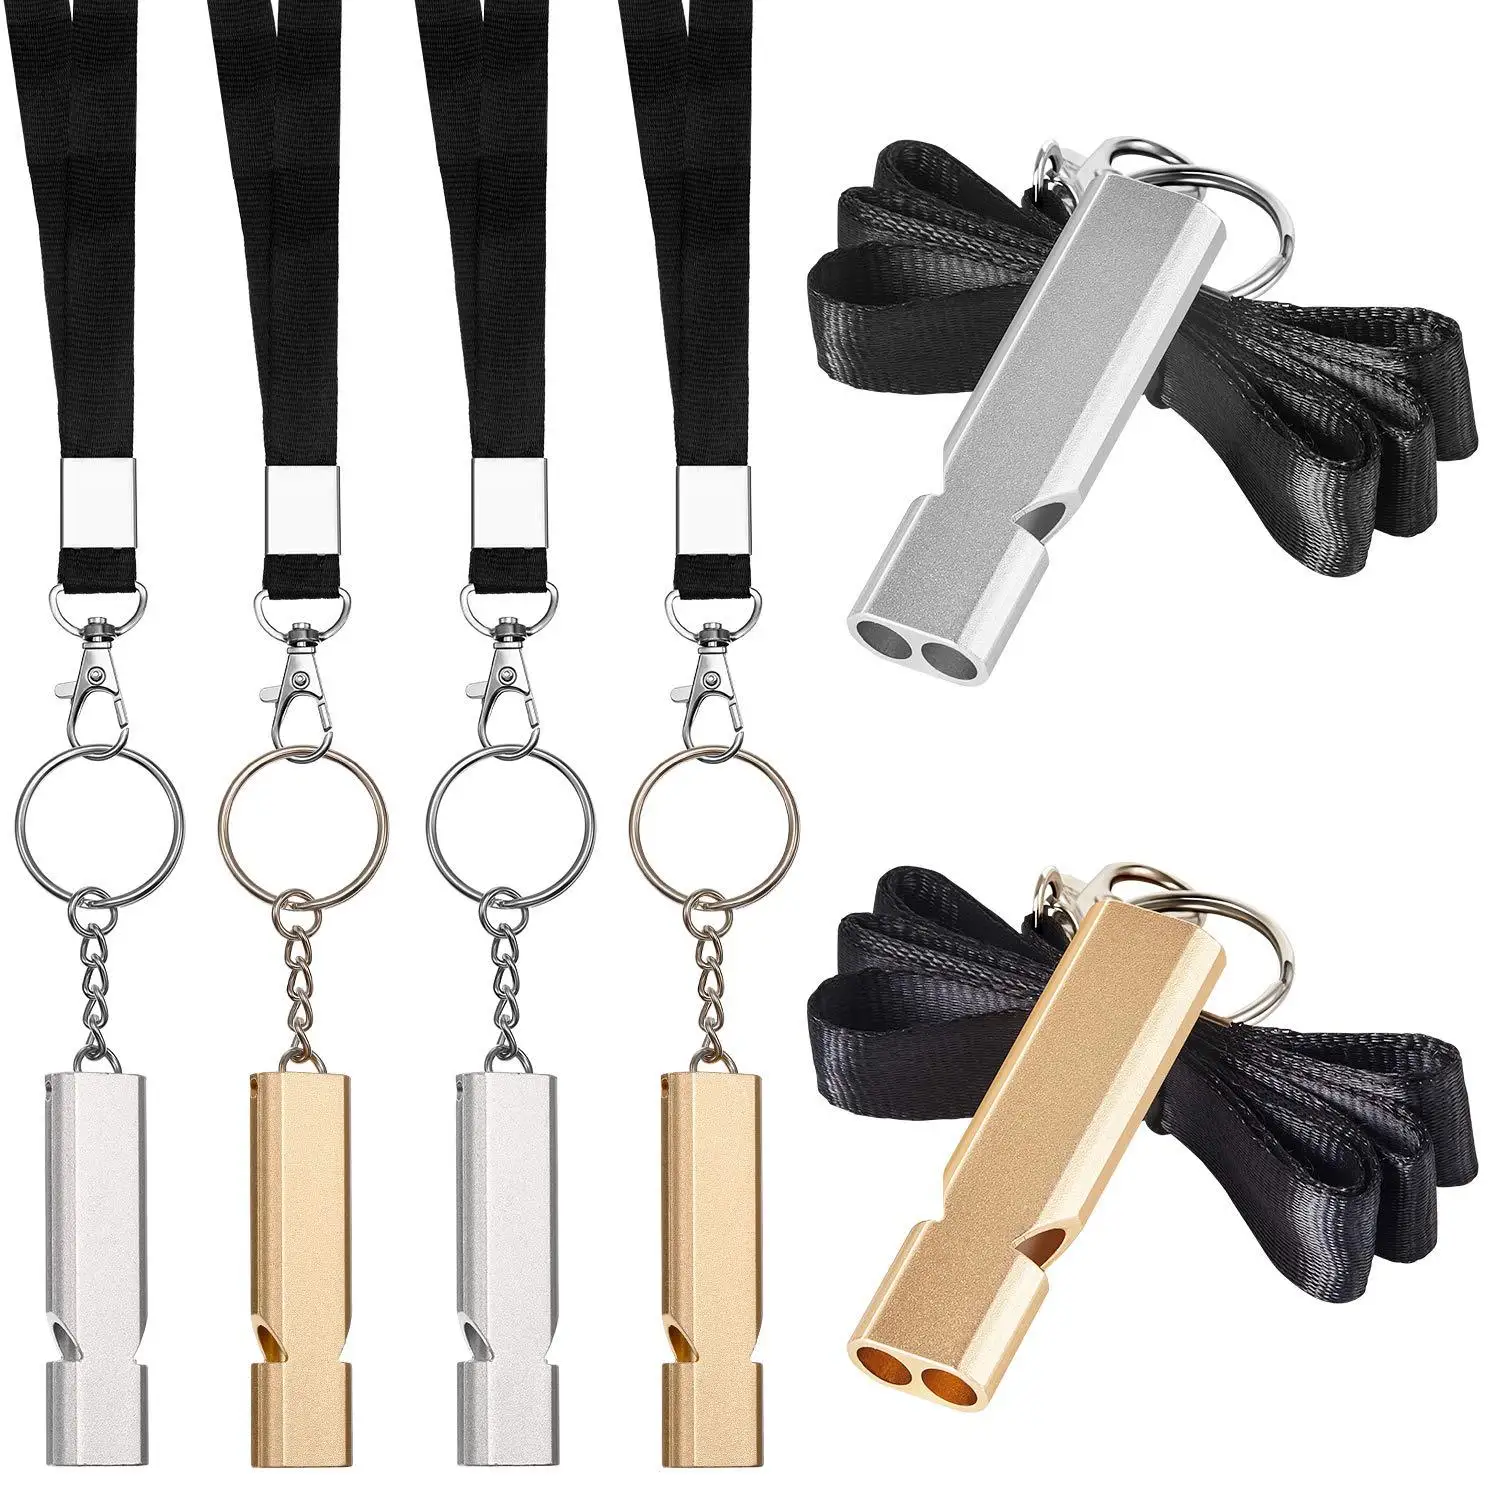 

Emergency Whistle Safety Survival Whistles with Lanyard Keychain for Outdoor Hiking Camping Hunting Boating #Wâ€‹